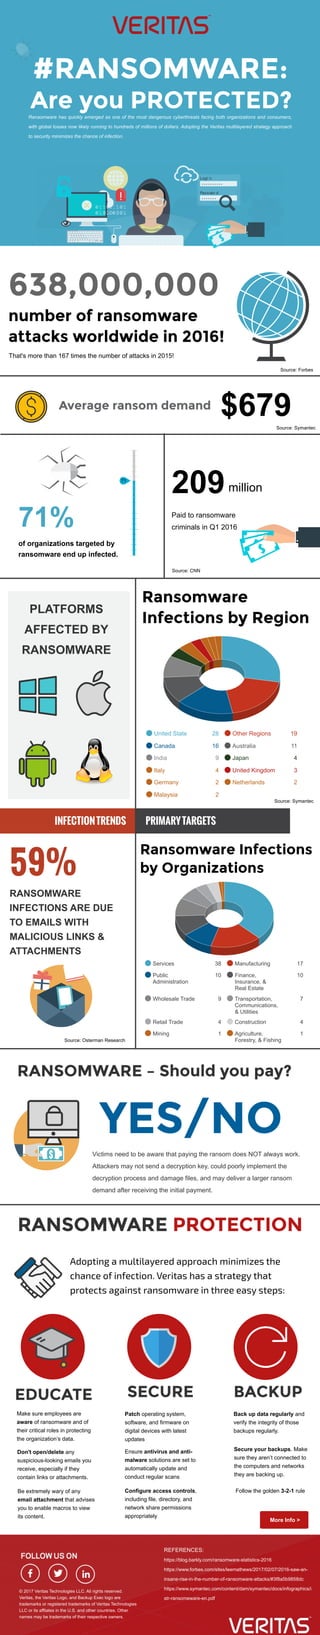 Ransomware	has	quickly	emerged	as	one	of	the	most	dangerous	cyberthreats	facing	both	organizations	and	consumers,
with	global	losses	now	likely	running	to	hundreds	of	millions	of	dollars.	Adopting	the	Veritas	multilayered	strategy	approach
to	security	minimizes	the	chance	of	infection.
71%
of	organizations	targeted	by
ransomware	end	up	infected.
209
Paid	to	ransomware
criminals	in	Q1	2016
United	State 28 Other	Regions 19
Canada 16 Australia 11
India 9 Japan 4
Italy 4 United	Kingdom 3
Germany 2 Netherlands 2
Malaysia 2
Services 38 Manufacturing 17
Public
Administration
10 Finance,
Insurance,	&
Real	Estate
10
Wholesale	Trade 9 Transportation,
Communications,
&	Utilities
7
Retail	Trade 4 Construction 4
Mining 1 Agriculture,
Forestry,	&	Fishing
1
PLATFORMS
AFFECTED	BY
RANSOMWARE
Victims	need	to	be	aware	that	paying	the	ransom	does	NOT	always	work.
Attackers	may	not	send	a	decryption	key,	could	poorly	implement	the
decryption	process	and	damage	files,	and	may	deliver	a	larger	ransom
demand	after	receiving	the	initial	payment.
Make	sure	employees	are
aware	of	ransomware	and	of
their	critical	roles	in	protecting
the	organization’s	data.
RANSOMWARE
INFECTIONS	ARE	DUE	
TO	EMAILS	WITH
MALICIOUS	LINKS	&
ATTACHMENTS
$679
million
That's	more	than	167	times	the	number	of	attacks	in	2015!
Source:	CNN
Source:	Symantec
Source:	Symantec
Source:	Osterman	Research
https://blog.barkly.com/ransomware-statistics-2016
https://www.forbes.com/sites/leemathews/2017/02/07/2016-saw-an-
insane-rise-in-the-number-of-ransomware-attacks/#3f8a5b9858dc
https://www.symantec.com/content/dam/symantec/docs/infographics/i
str-ransomeware-en.pdf
REFERENCES:
Patch	operating	system,
software,	and	firmware	on
digital	devices	with	latest
updates
Back	up	data	regularly	and
verify	the	integrity	of	those
backups	regularly.	
Secure	your	backups.	Make
sure	they	aren’t	connected	to
the	computers	and	networks
they	are	backing	up.
Follow	the	golden	3-2-1	ruleConfigure	access	controls,
including	file,	directory,	and
network	share	permissions
appropriately
Ensure	antivirus	and	anti-
malware	solutions	are	set	to
automatically	update	and
conduct	regular	scans
Don't	open/delete	any
suspicious-looking	emails	you
receive,	especially	if	they
contain	links	or	attachments.
Be	extremely	wary	of	any
email	attachment	that	advises
you	to	enable	macros	to	view
its	content.
©	2017	Veritas	Technologies	LLC.	All	rights	reserved.	
Veritas,	the	Veritas	Logo,	and	Backup	Exec	logo	are
trademarks	or	registered	trademarks	of	Veritas	Technologies
LLC	or	its	affliates	in	the	U.S.	and	other	countries.	Other
names	may	be	trademarks	of	their	respective	owners.
More	Info	>
Source:	Forbes
 